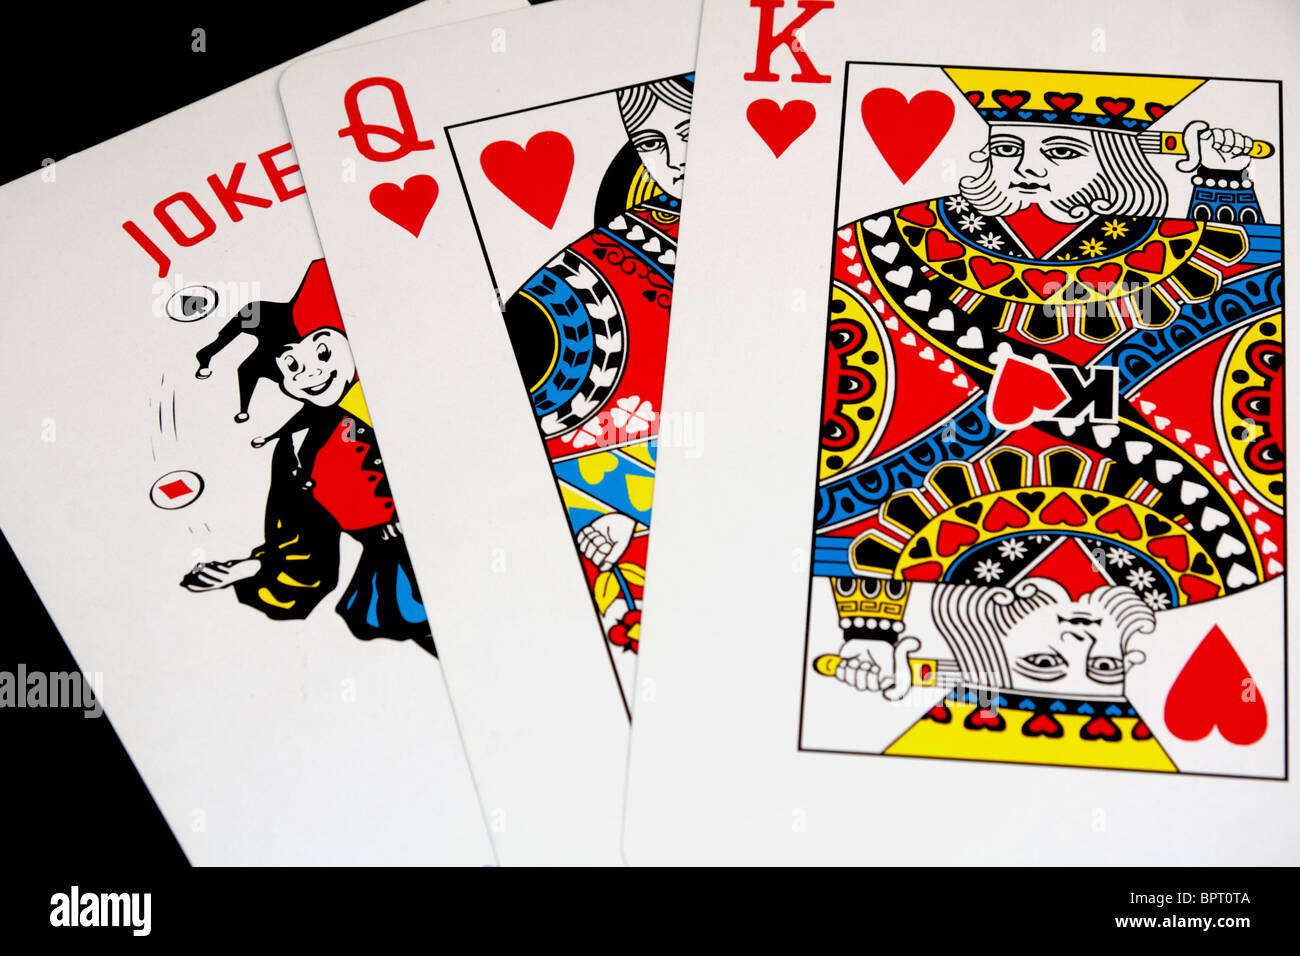 King Queen With Joker On Black Background Stock Photo Alamy